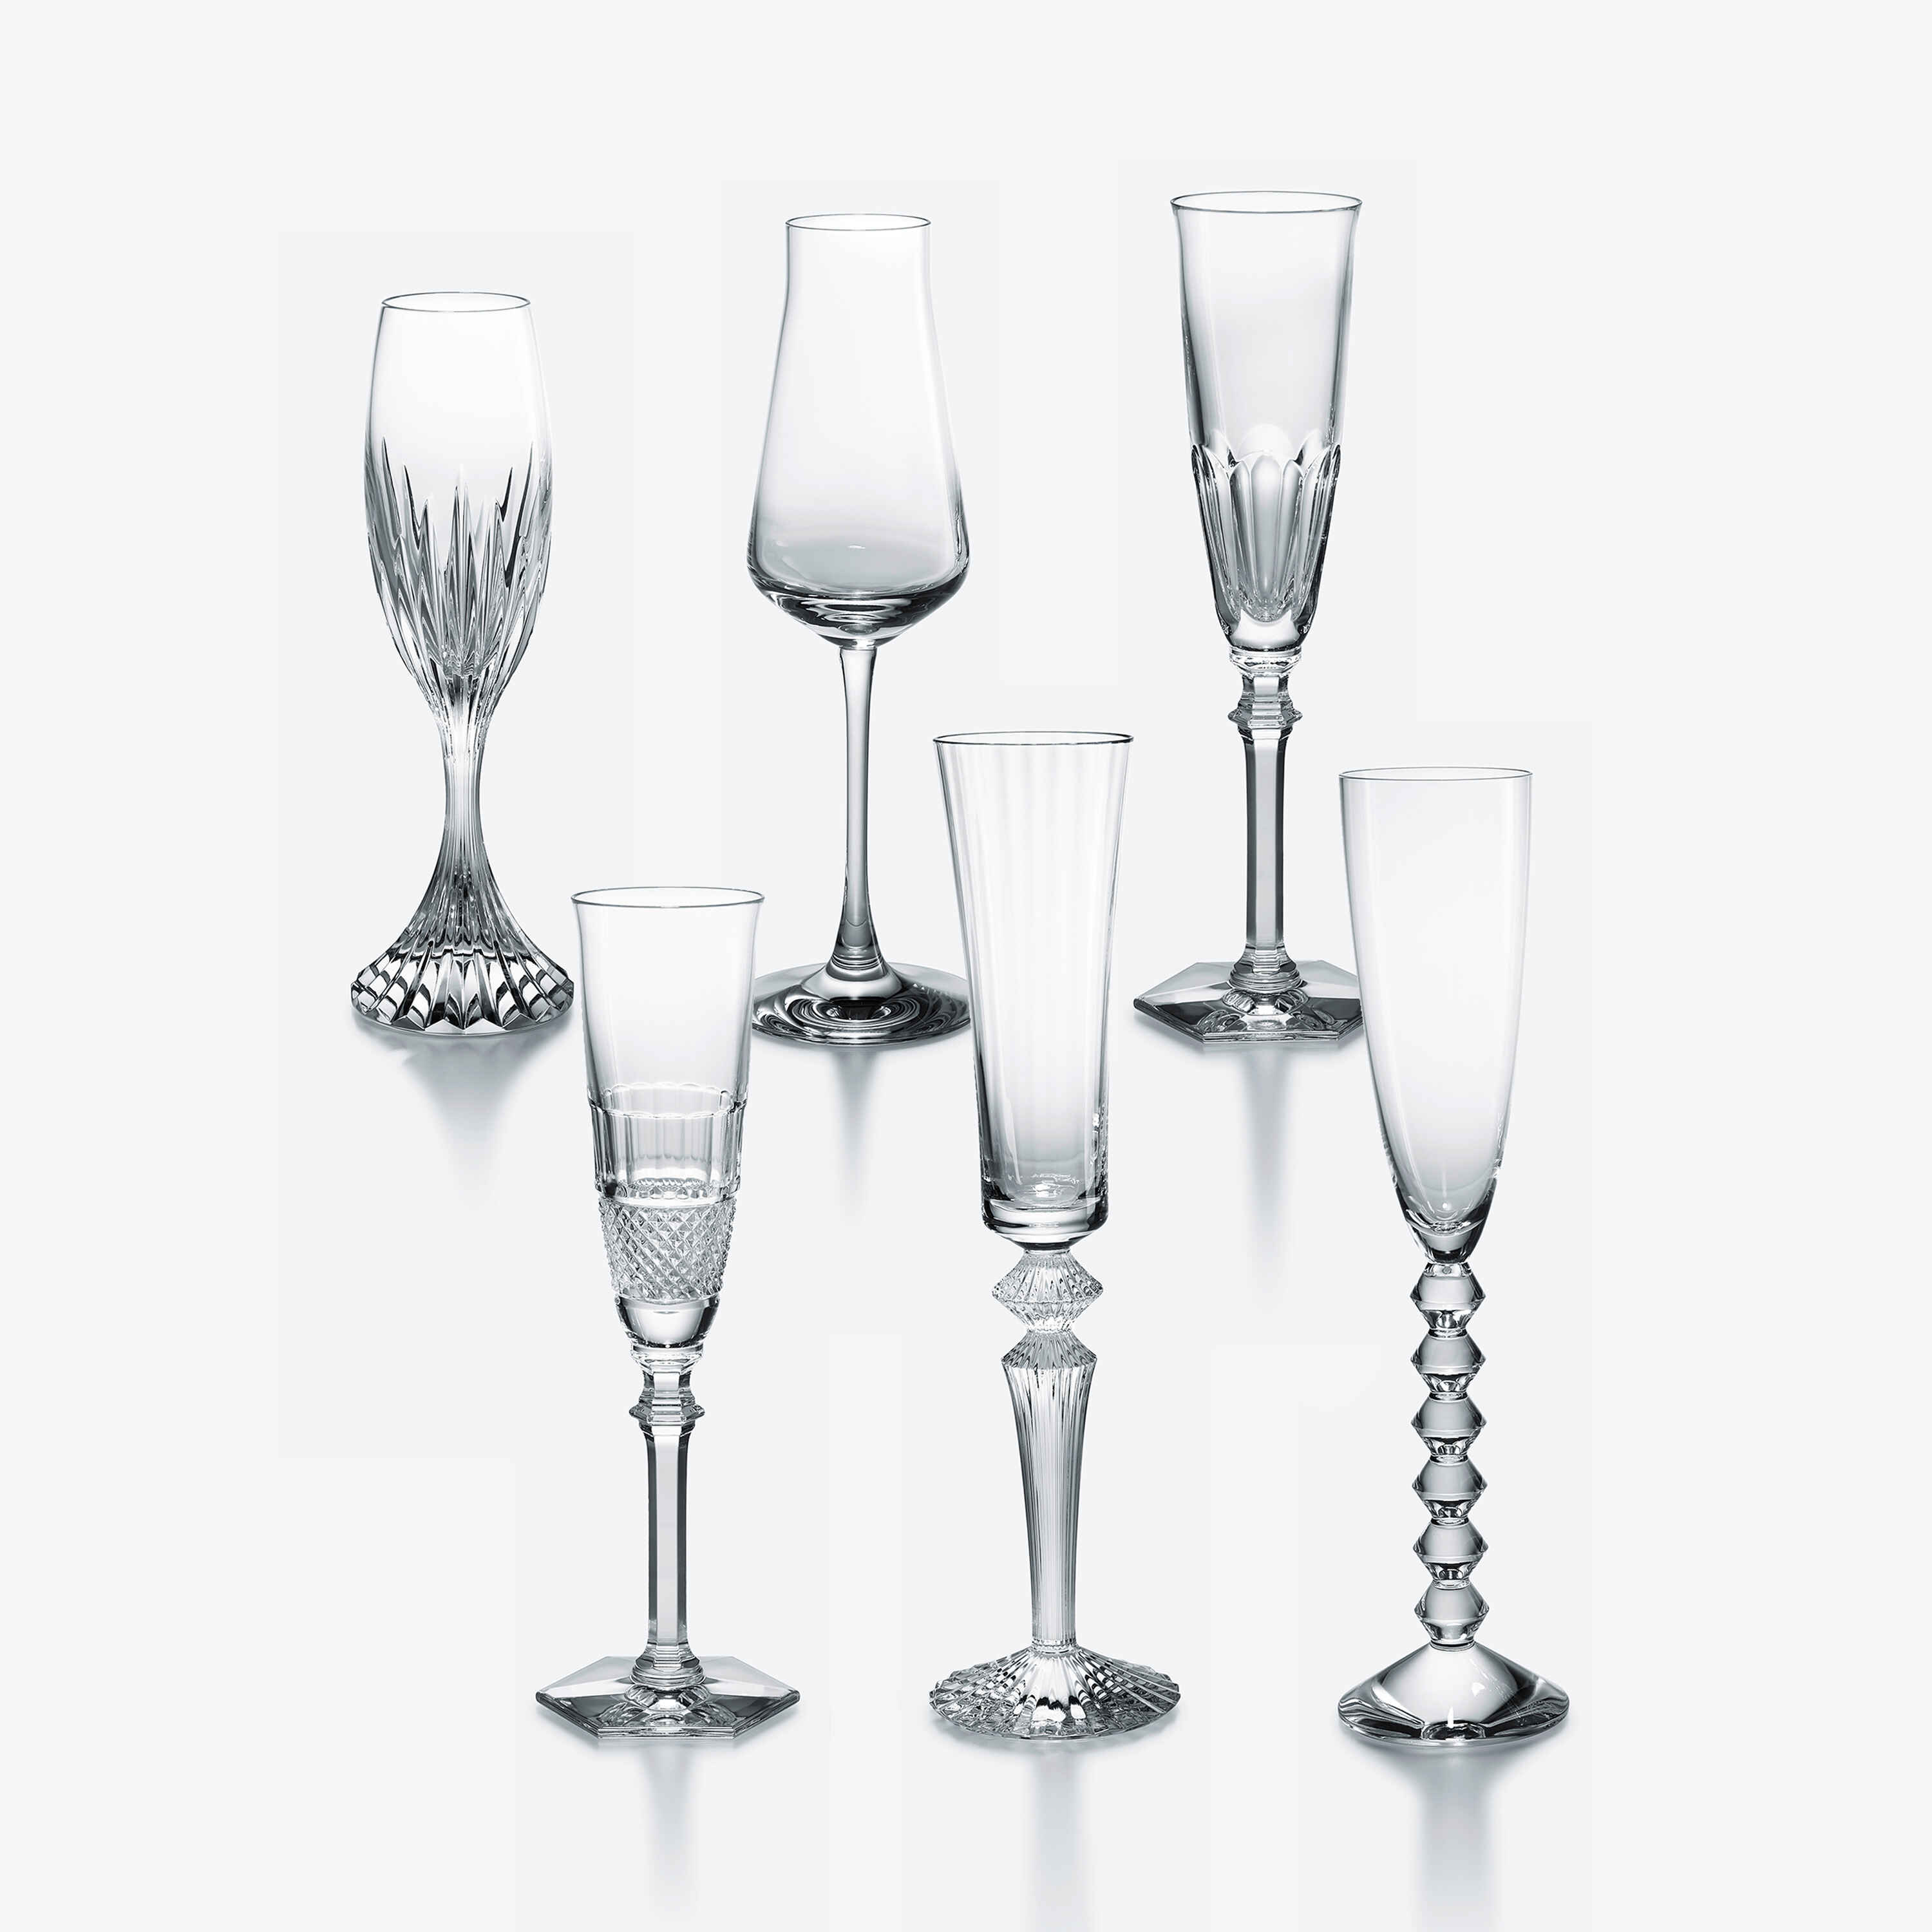 COFFRET WINE THERAPY BACCARAT